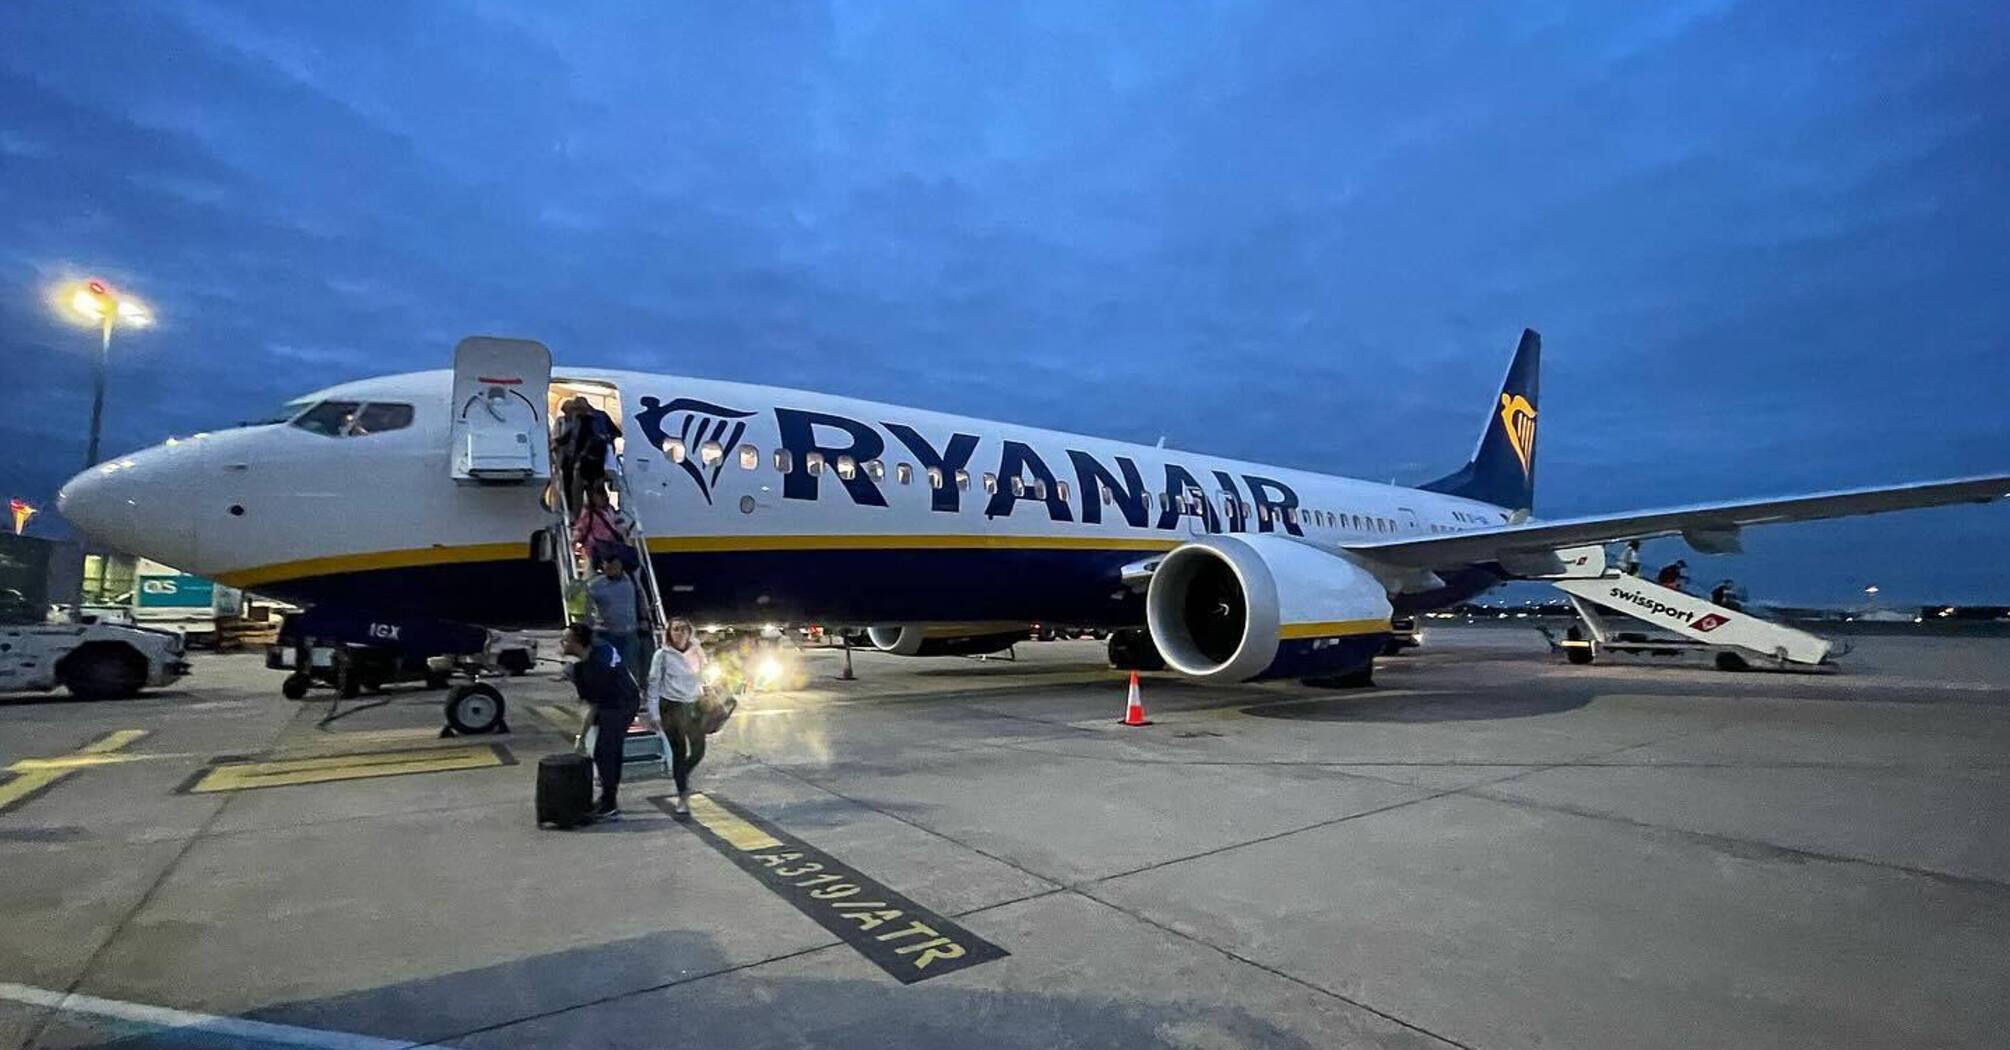 Ryanair apologizes to passenger who was mistakenly banned from flying